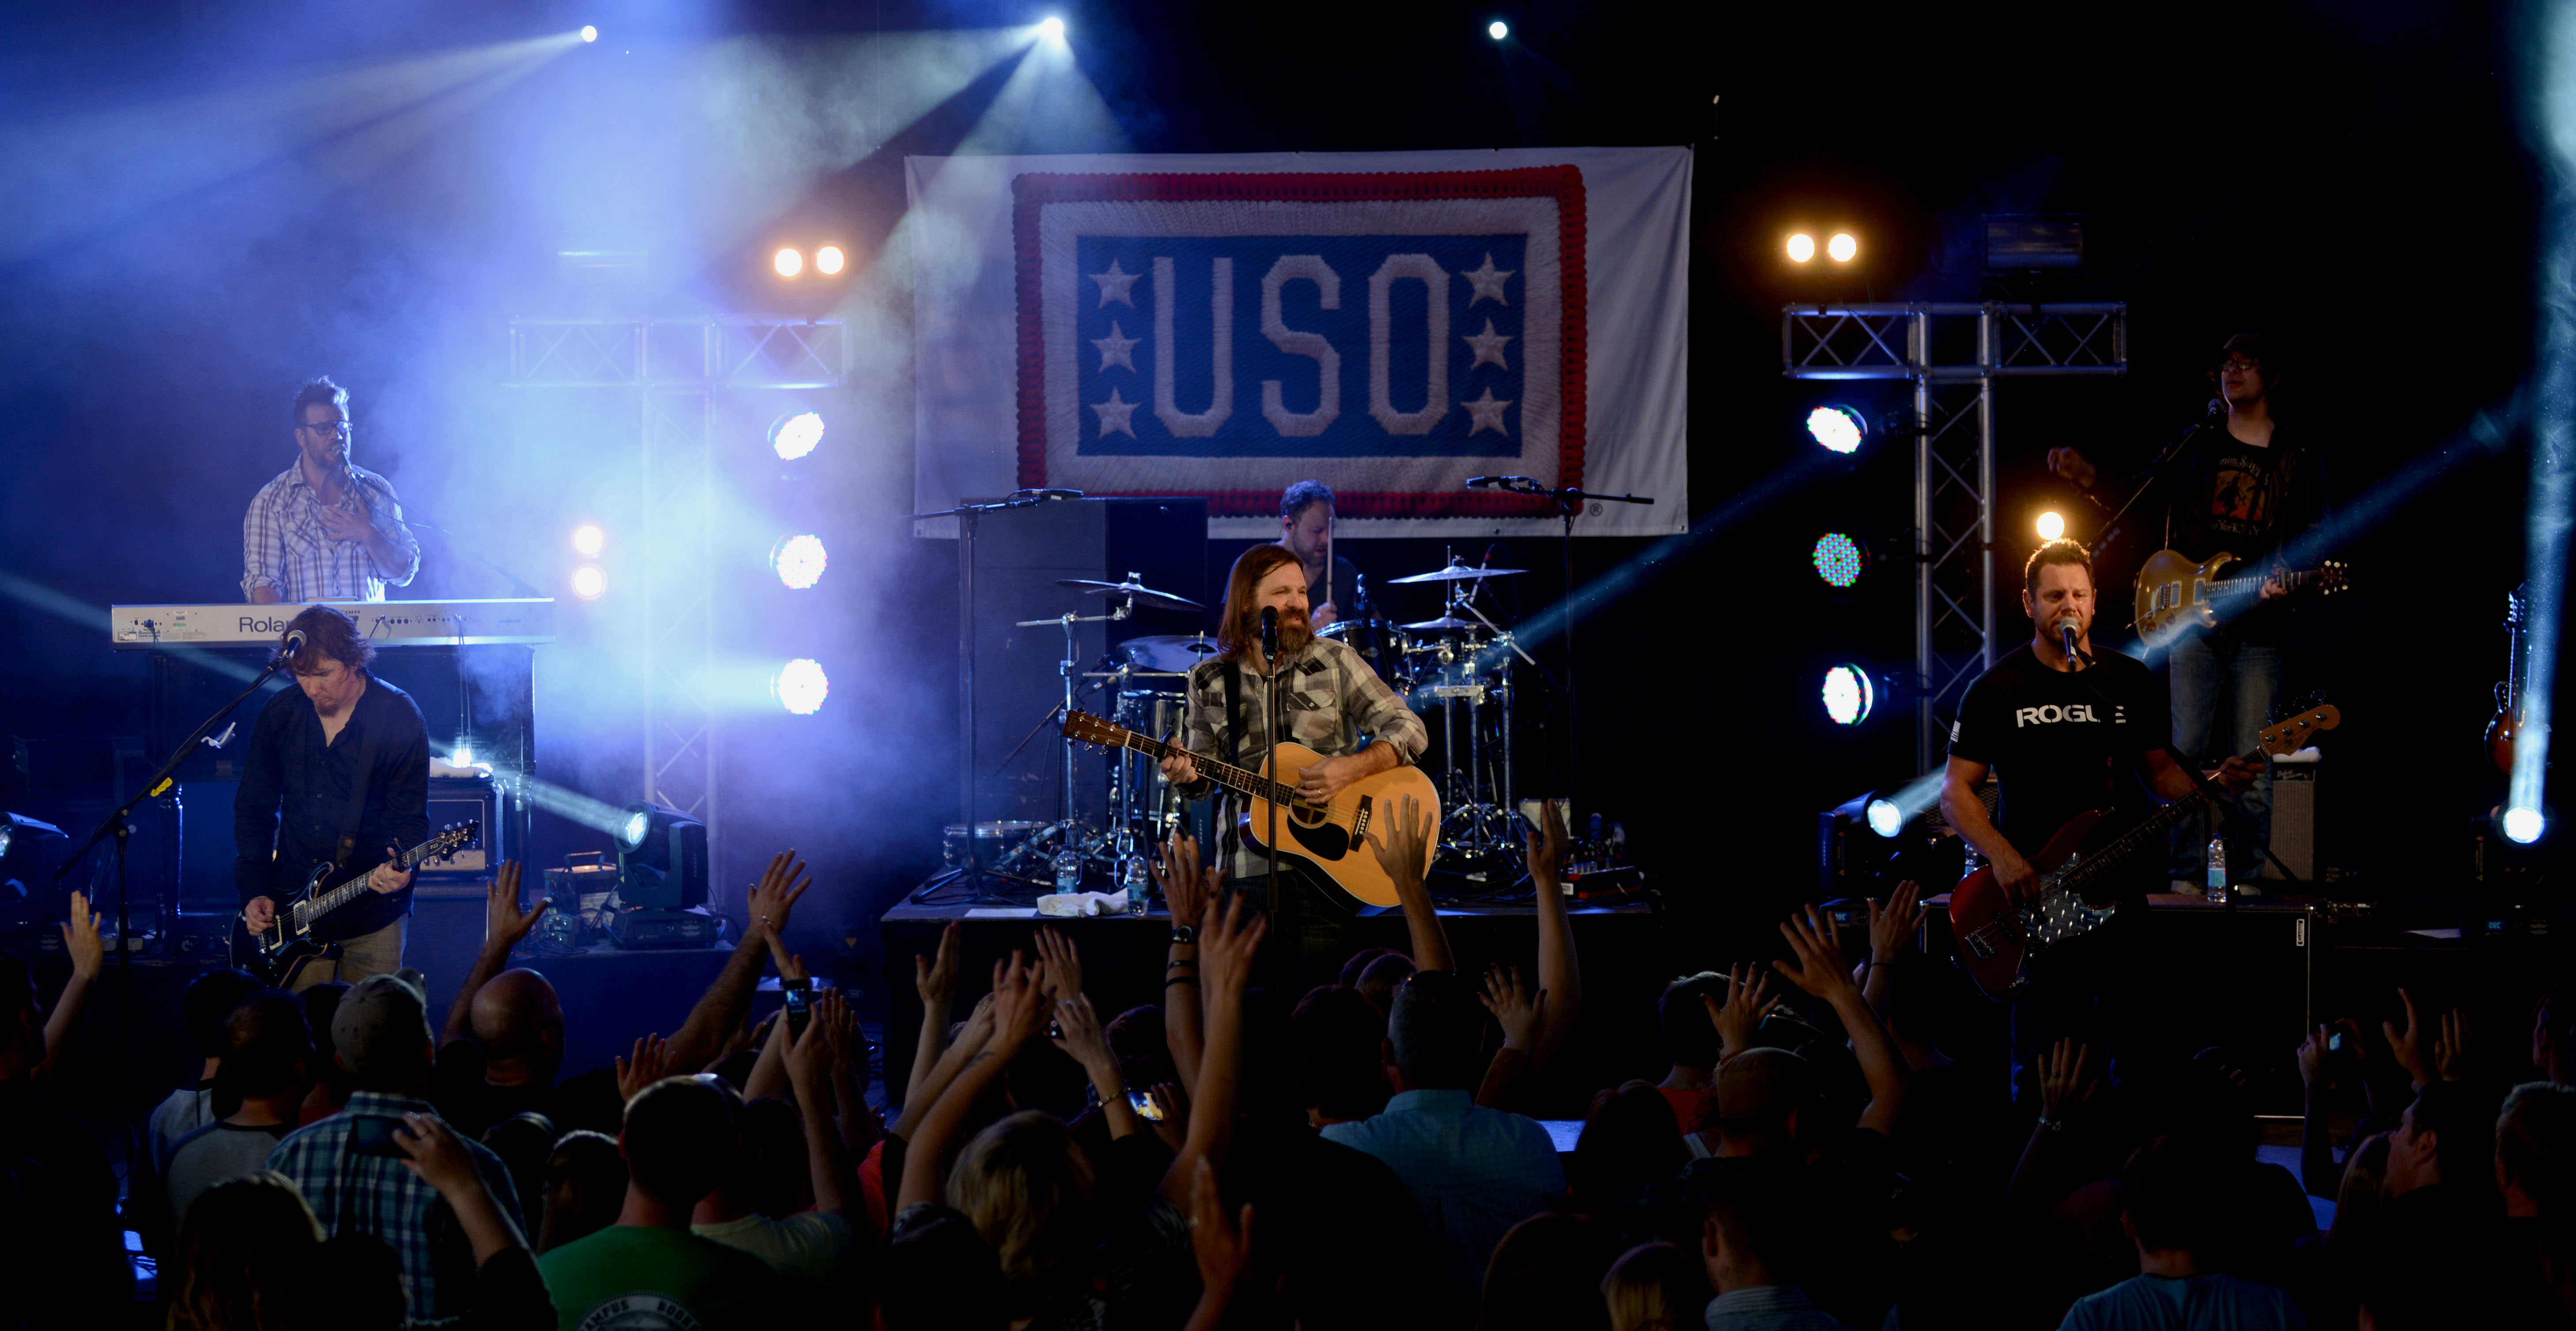 THIRD DAY Kicks Off Tour with USO Concert for Troops and their Families